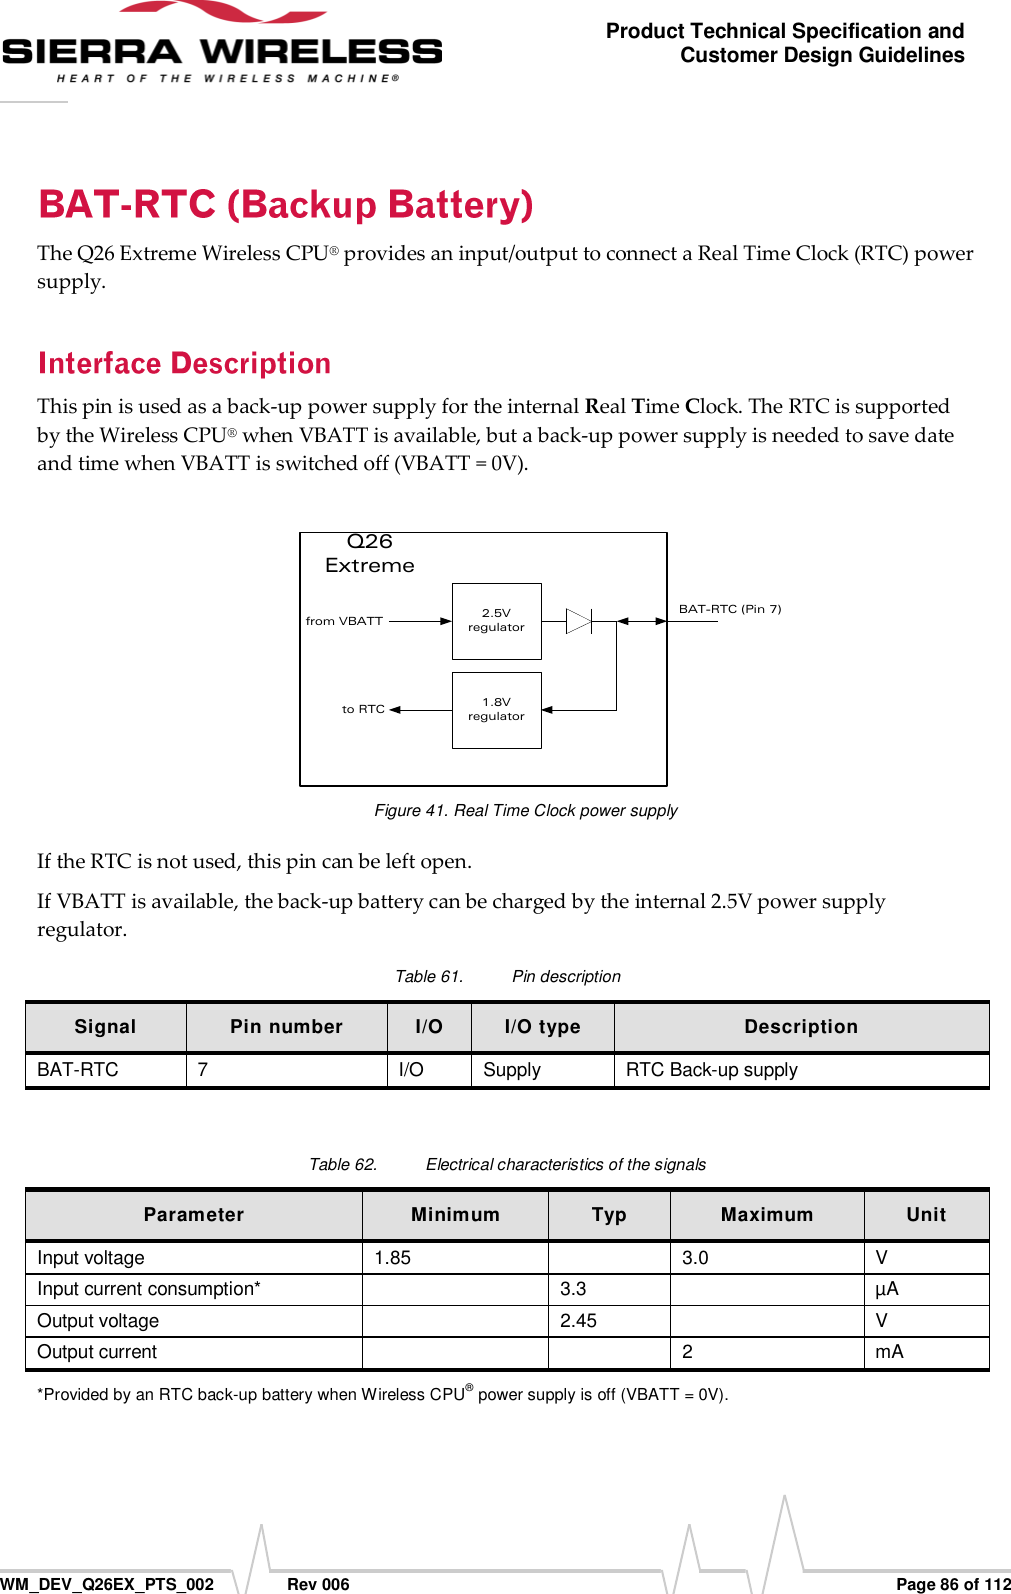      WM_DEV_Q26EX_PTS_002  Rev 006  Page 86 of 112 Product Technical Specification and Customer Design Guidelines The Q26 Extreme Wireless CPU® provides an input/output to connect a Real Time Clock (RTC) power supply. This pin is used as a back-up power supply for the internal Real Time Clock. The RTC is supported by the Wireless CPU® when VBATT is available, but a back-up power supply is needed to save date and time when VBATT is switched off (VBATT = 0V).  2.5V regulator1.8V regulatorfrom VBATTto RTCQ26 ExtremeBAT-RTC (Pin 7) Figure 41. Real Time Clock power supply If the RTC is not used, this pin can be left open. If VBATT is available, the back-up battery can be charged by the internal 2.5V power supply regulator. Table 61.  Pin description Signal Pin number I/O I/O type Description BAT-RTC 7 I/O Supply RTC Back-up supply  Table 62.  Electrical characteristics of the signals Parameter Minimum Typ Maximum Unit Input voltage 1.85  3.0 V Input current consumption*  3.3  µA Output voltage  2.45  V Output current   2 mA *Provided by an RTC back-up battery when Wireless CPU® power supply is off (VBATT = 0V). 